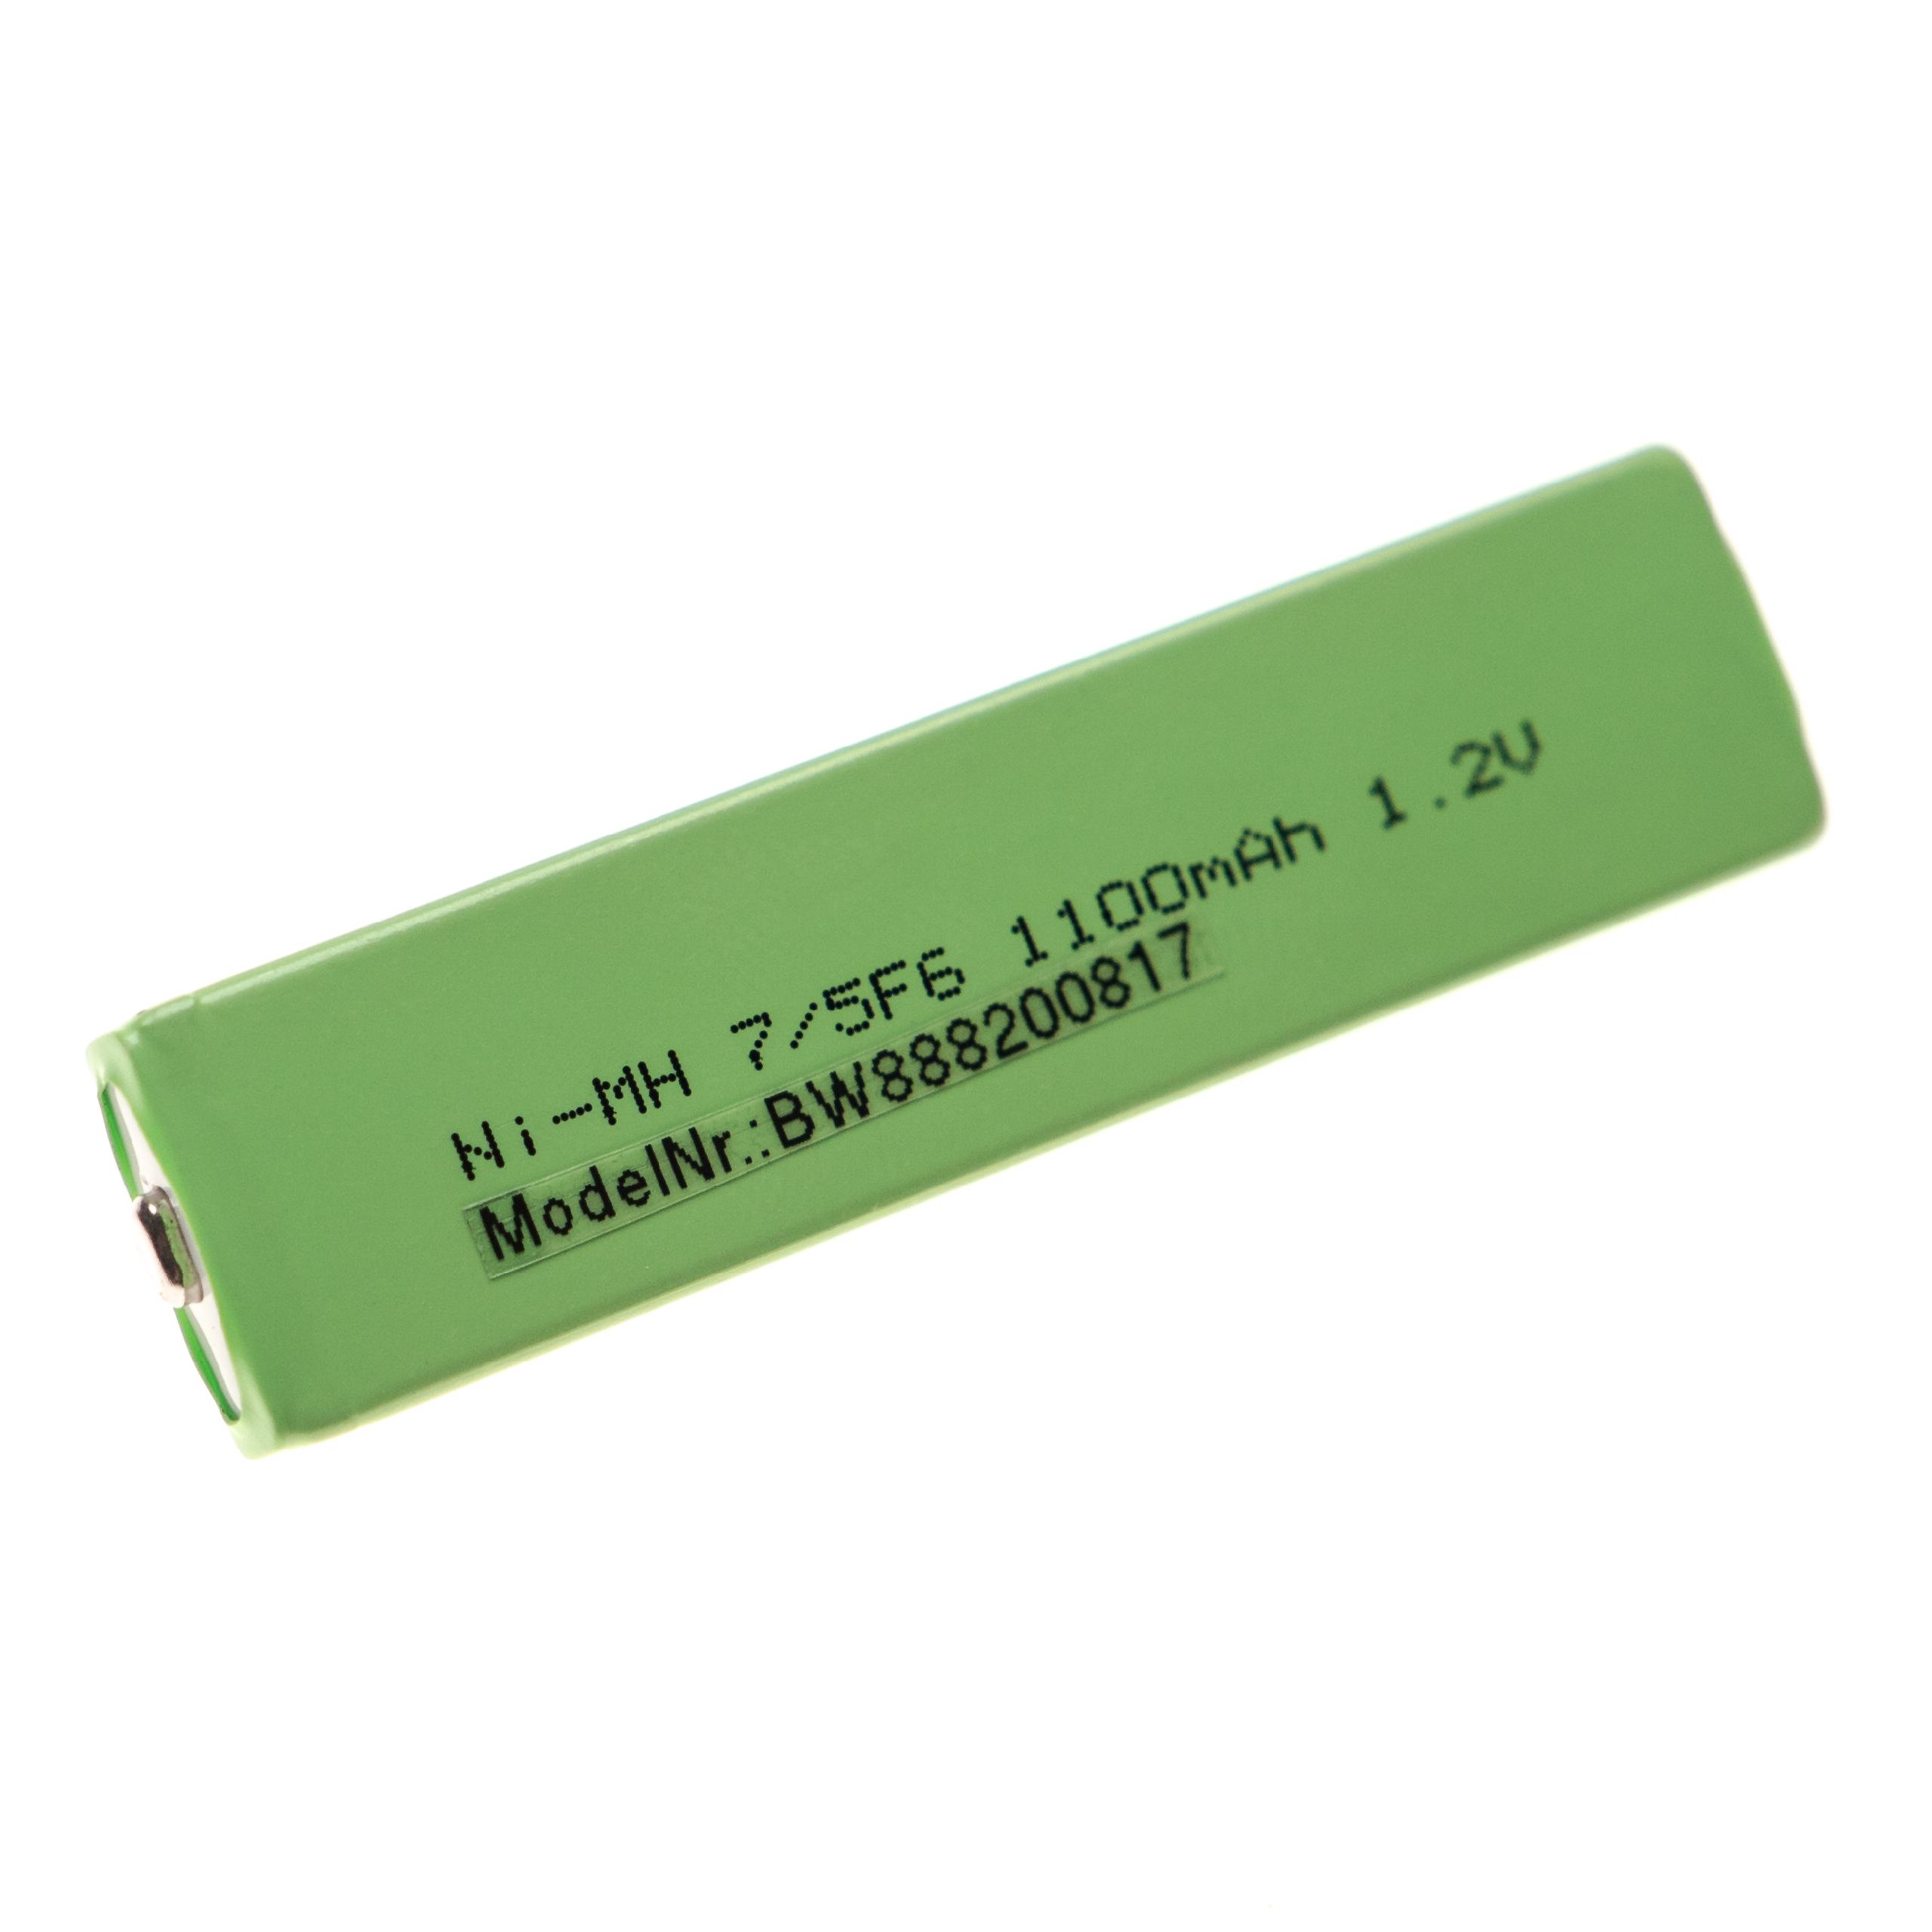 CD Player Battery Cell Replacement for Aiwa MHB-901 - 1100mAh 1.2V NiMH